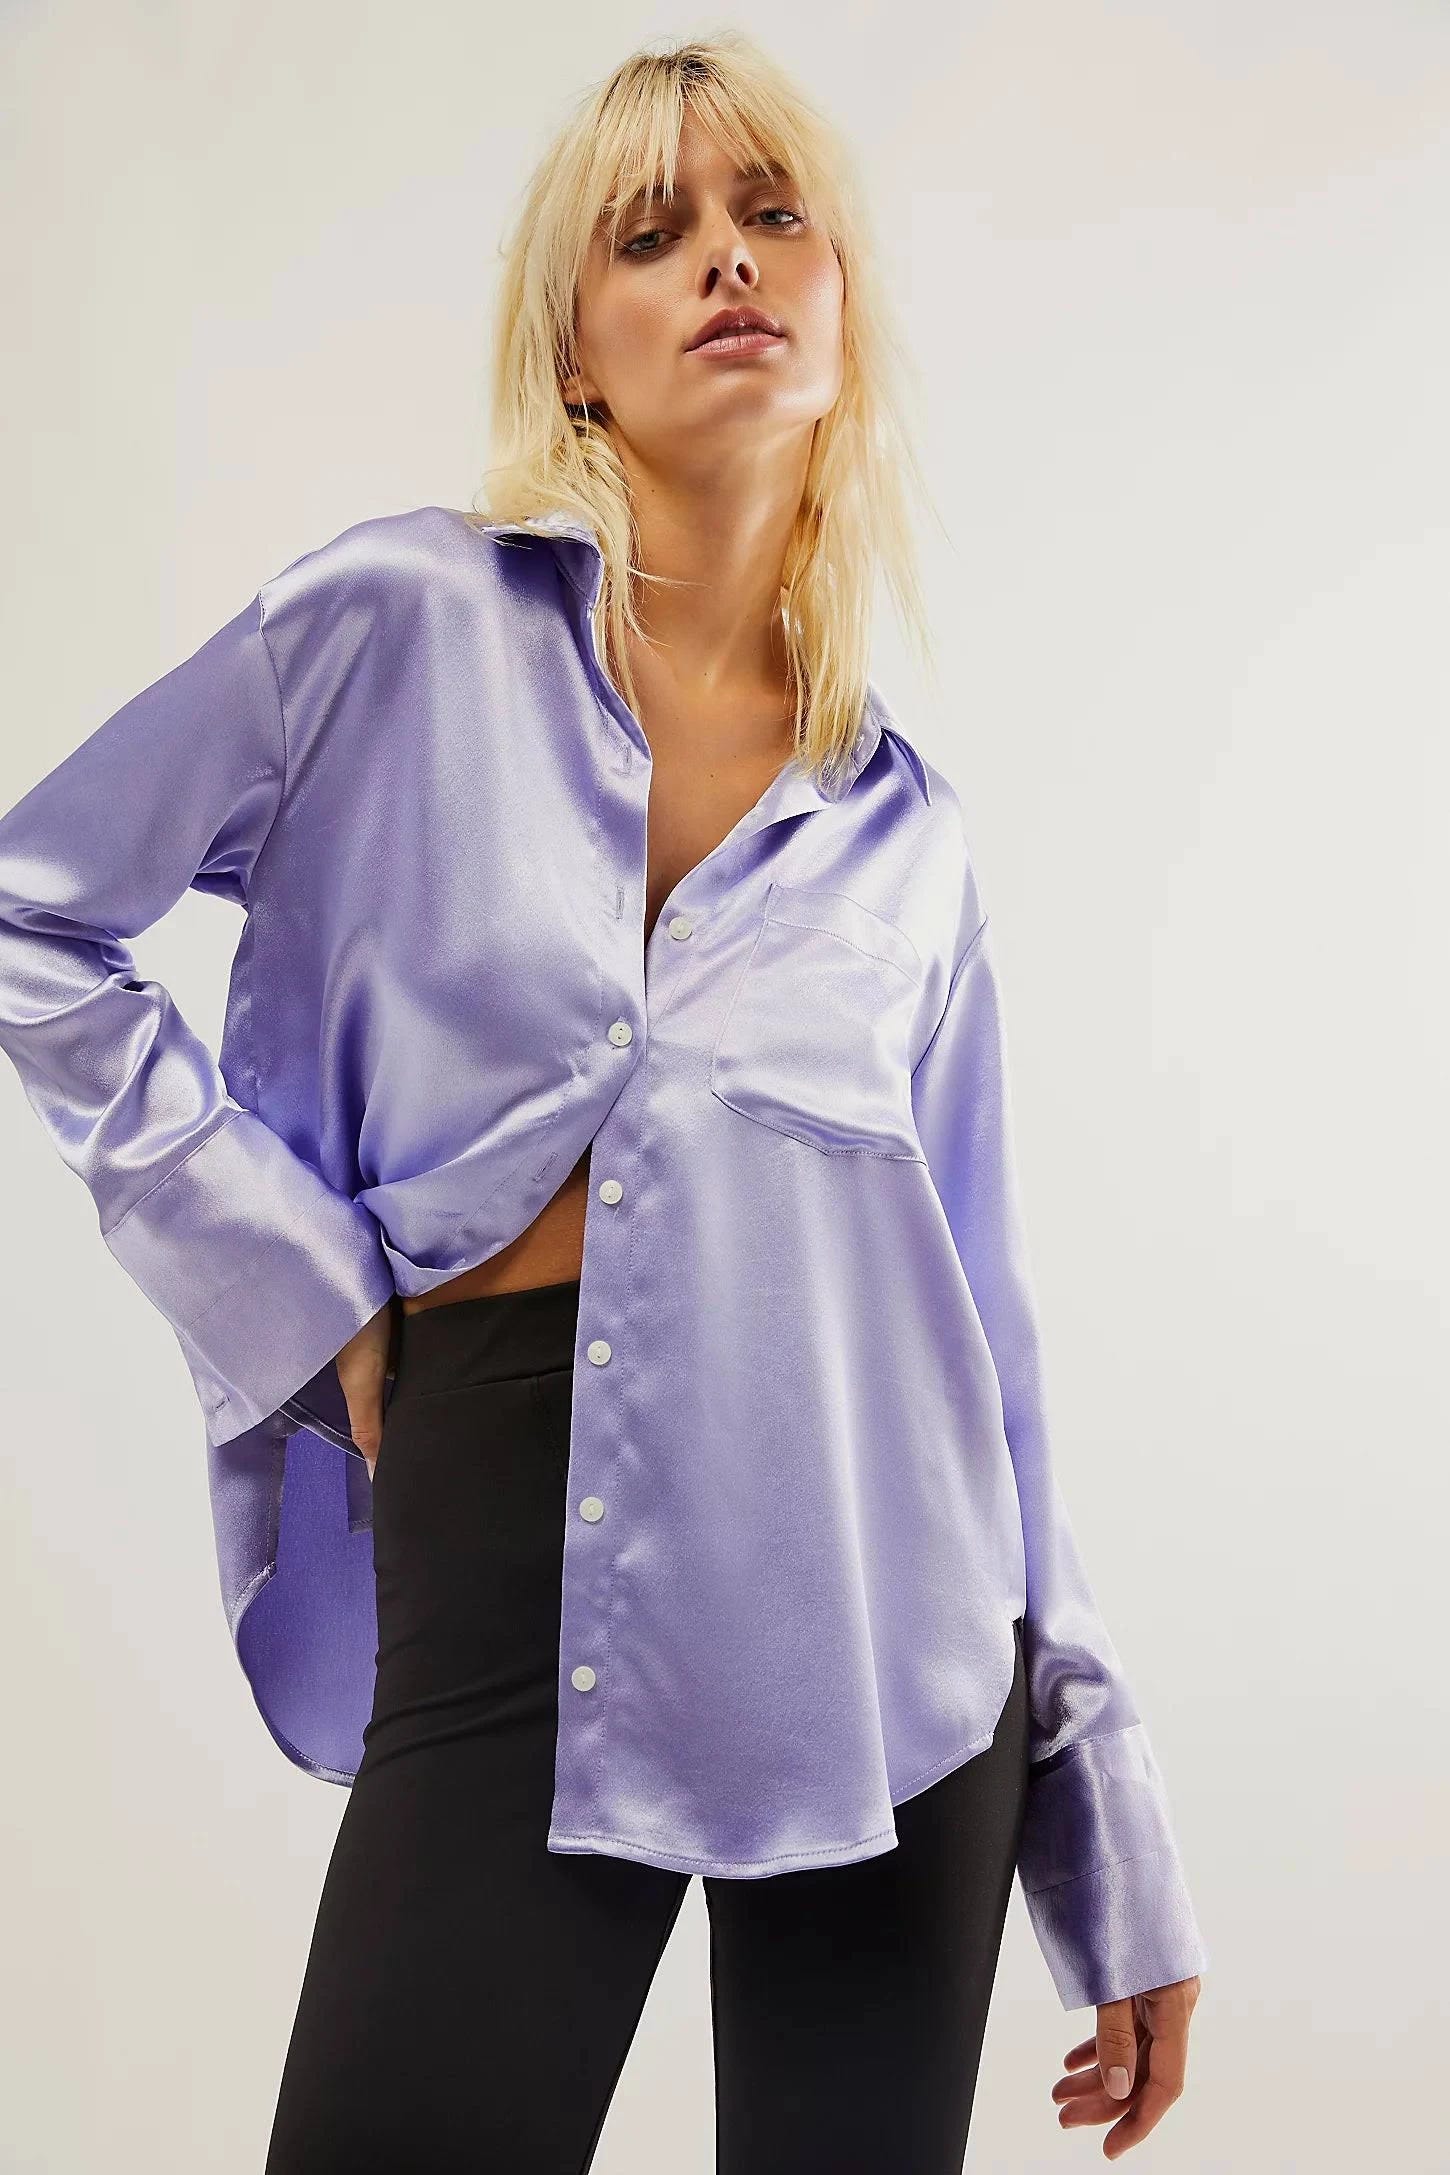 Elegant Lavender Button-Front Shirt by Free People | Image